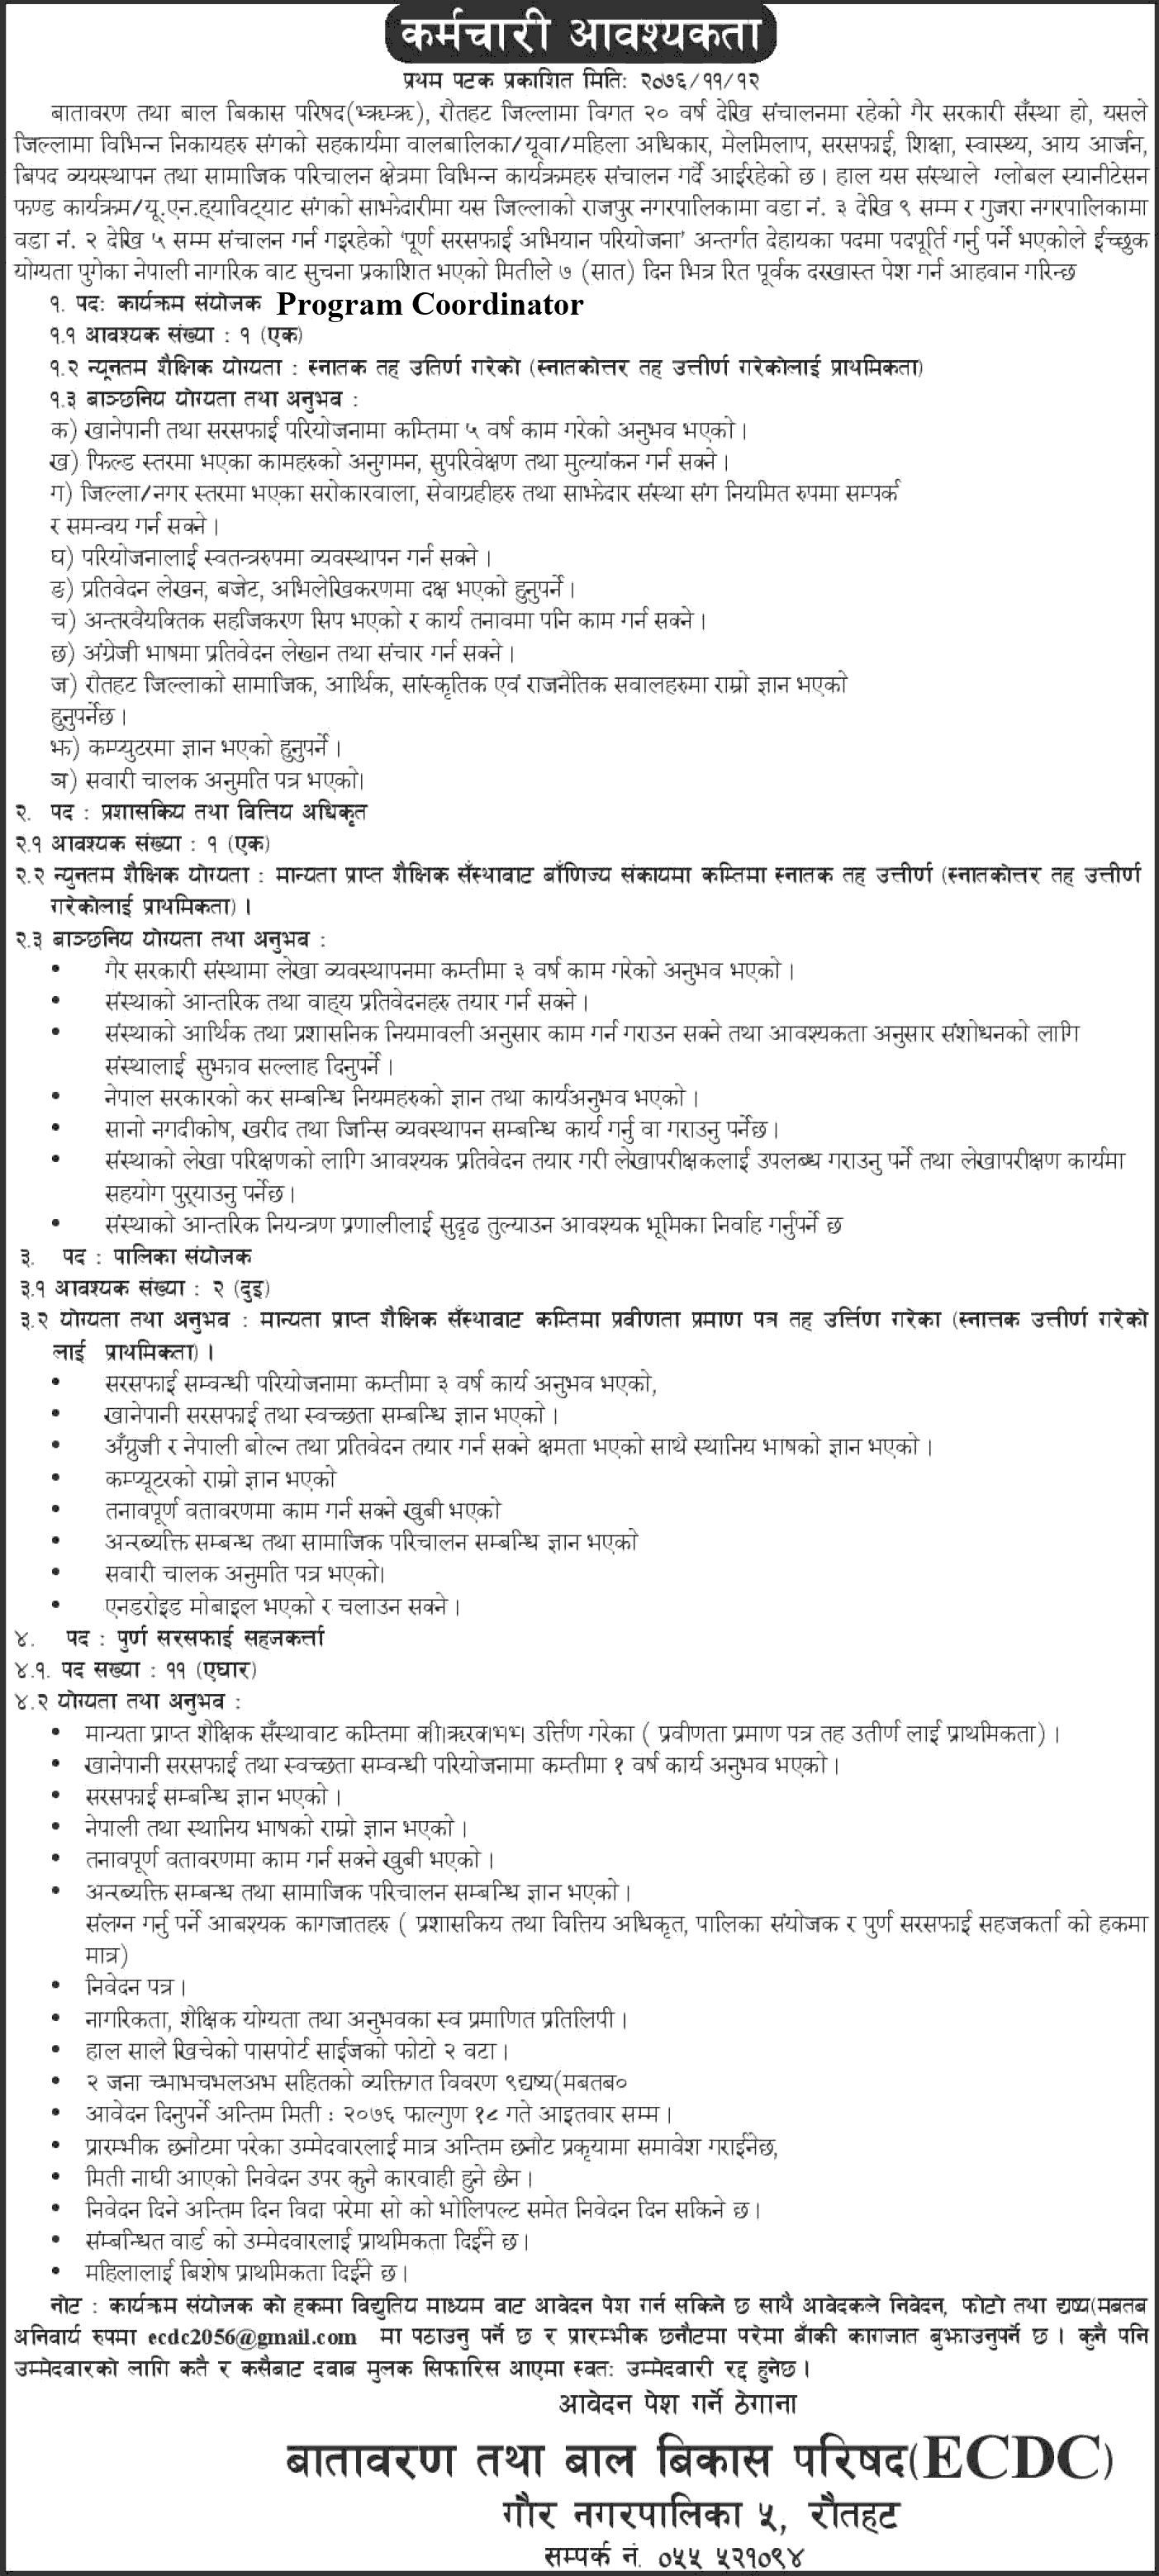 Environment and Child Development Council,Rautahat Vacancy